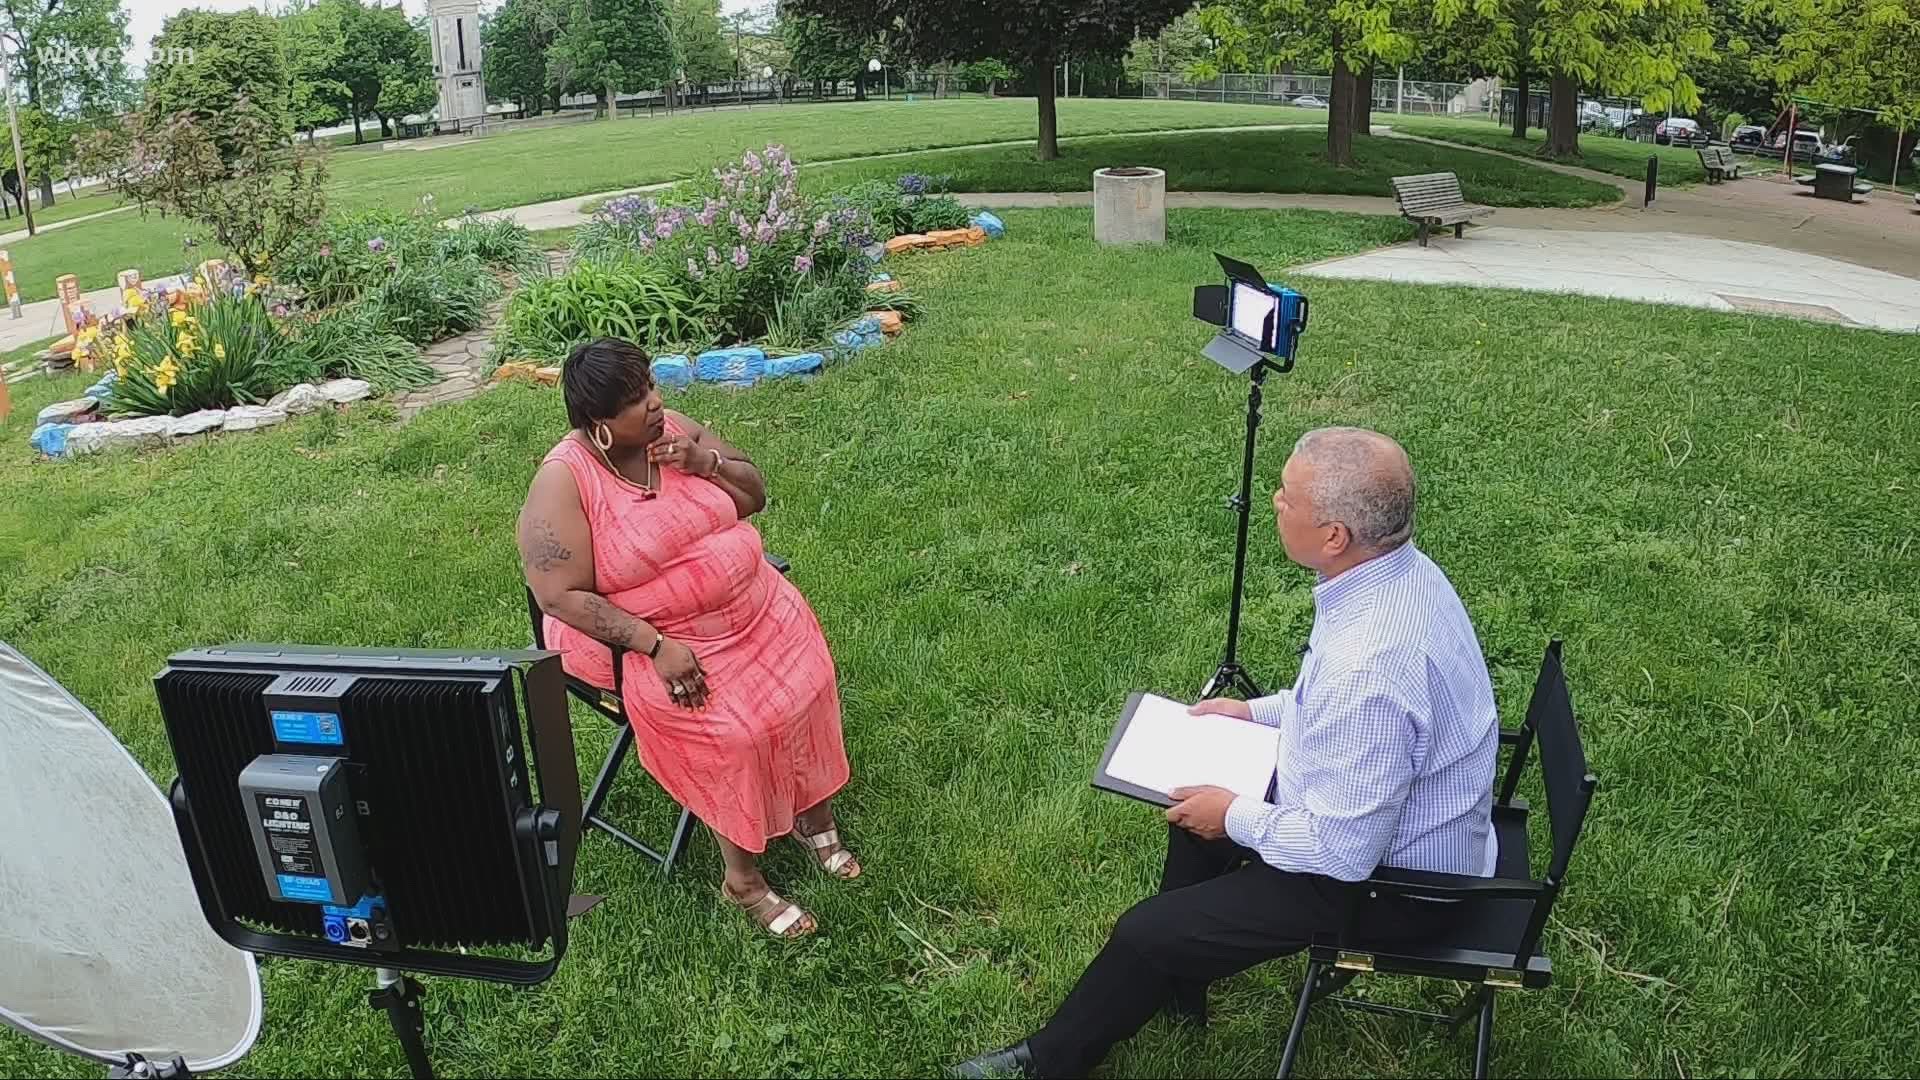 On Tuesday, Samaria Rice will go one-on-one with our Russ Mitchell. Stay with 3News throughout the day for coverage.